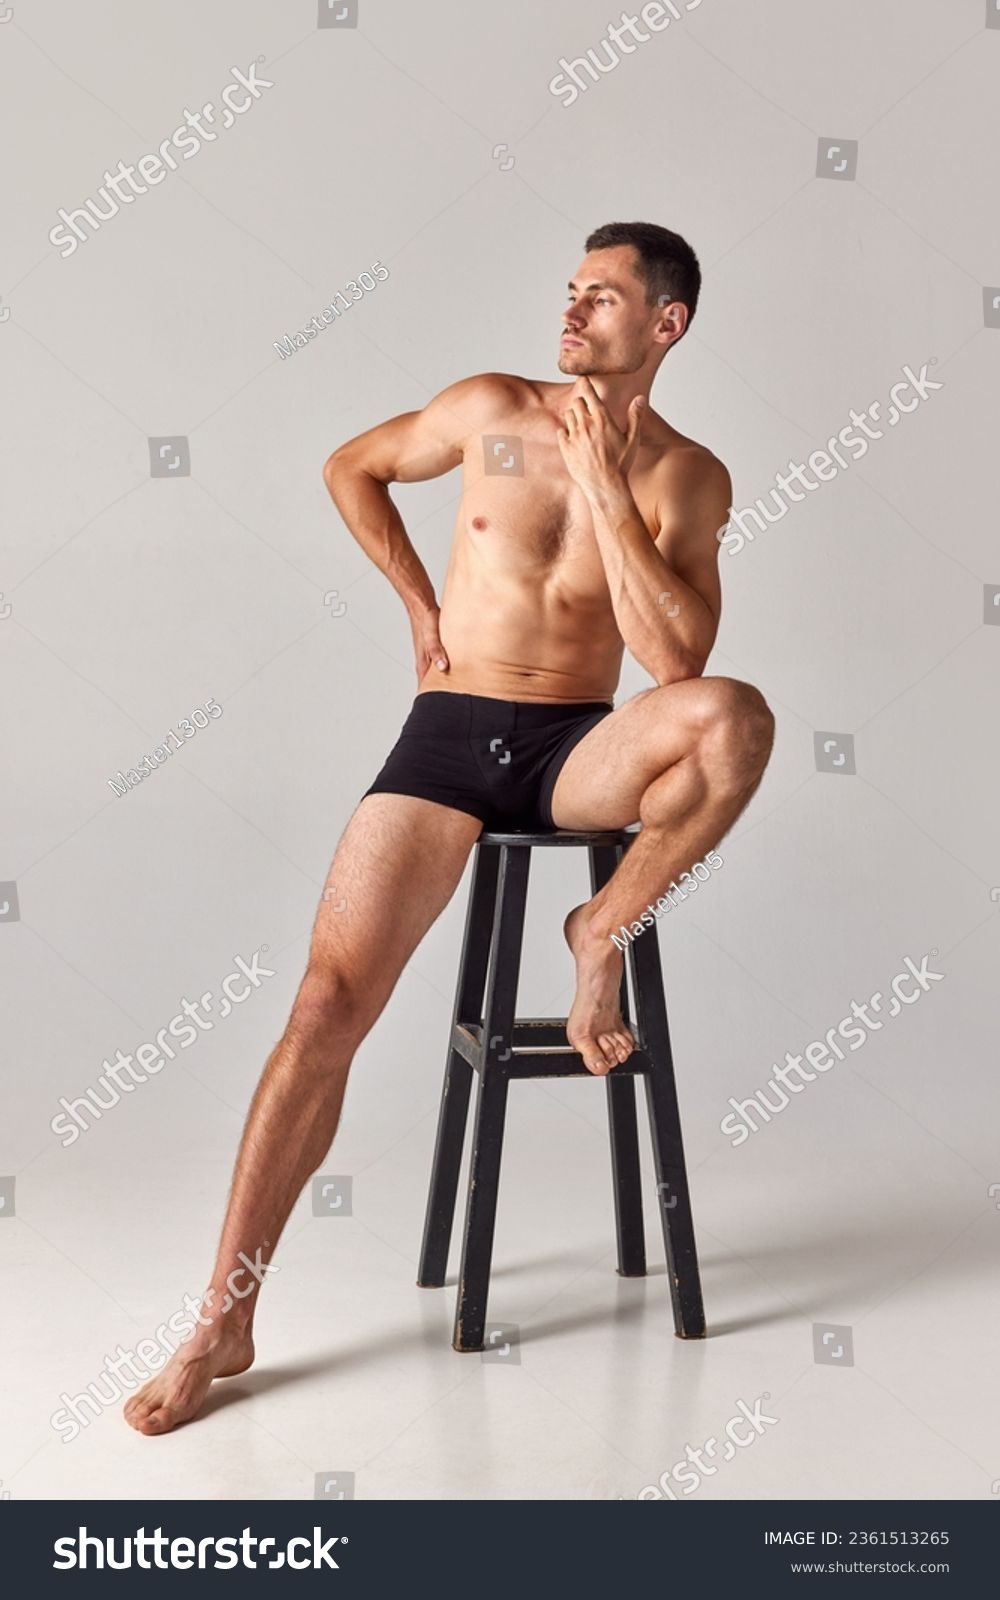 Full-length portrait of handsome, muscular young man sitting on chair in underwear and posing against grey studio background. Concept of men's health and beauty, body care, fitness, wellness, ad #2361513265